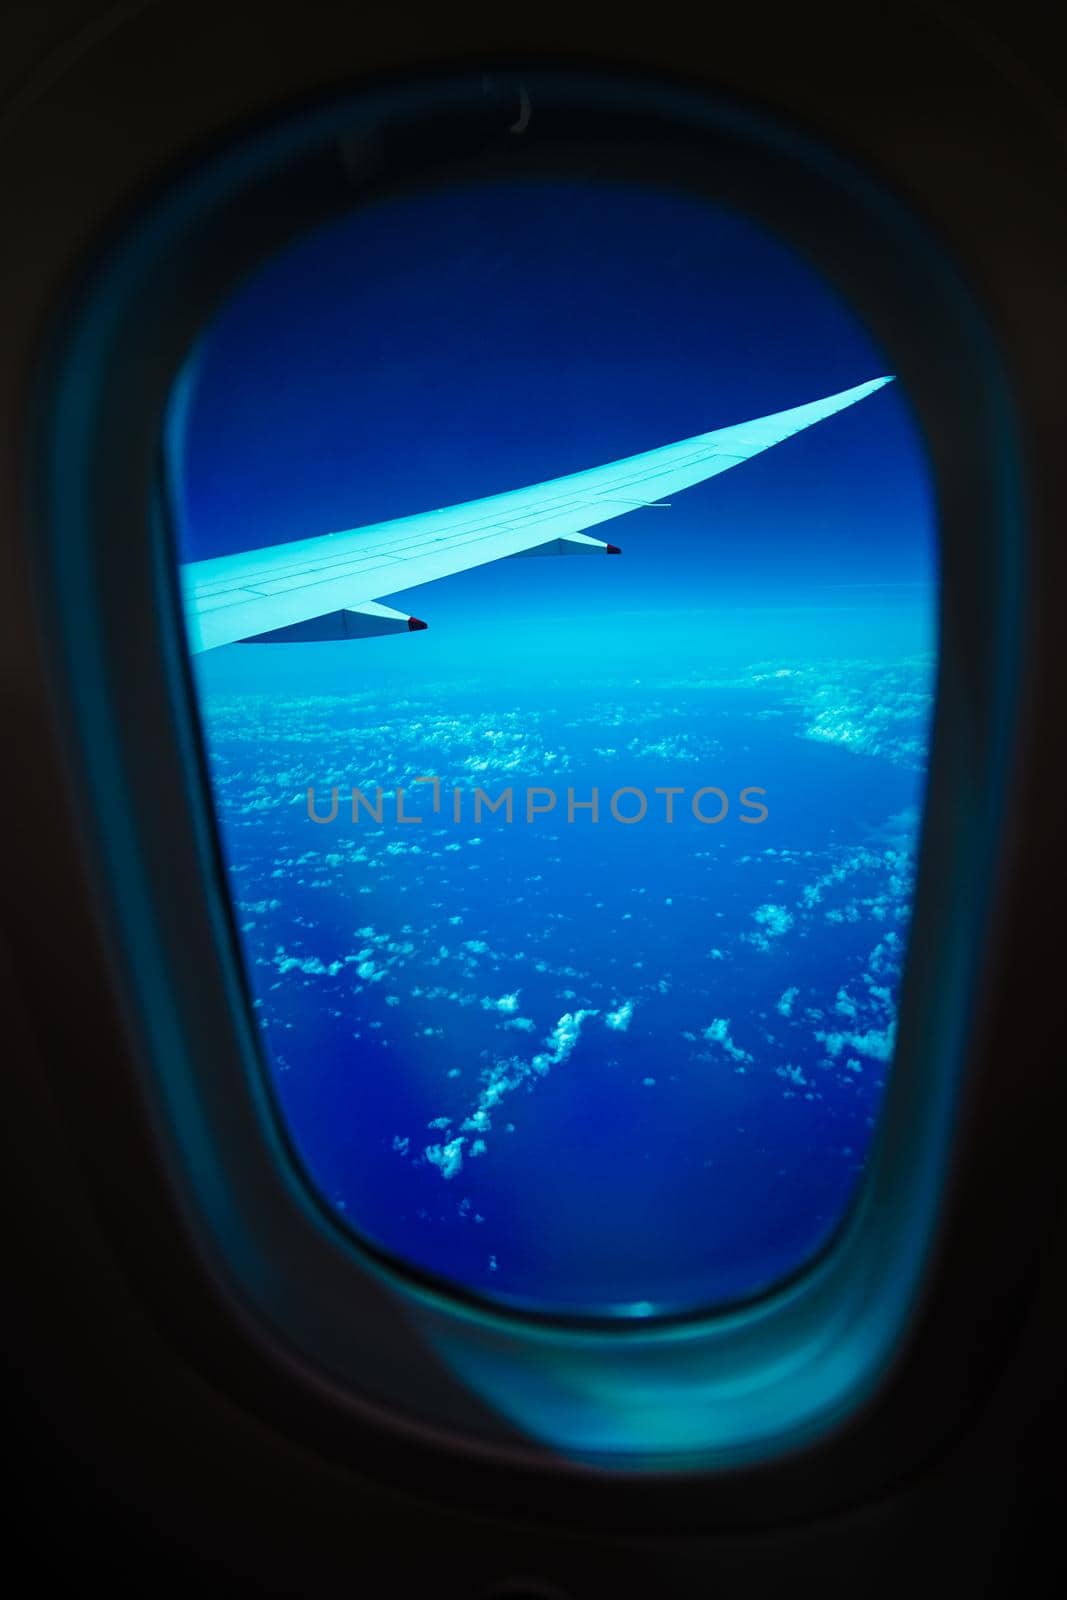 Landscape seen from the window of the plane. Shooting Location: Tokyo metropolitan area